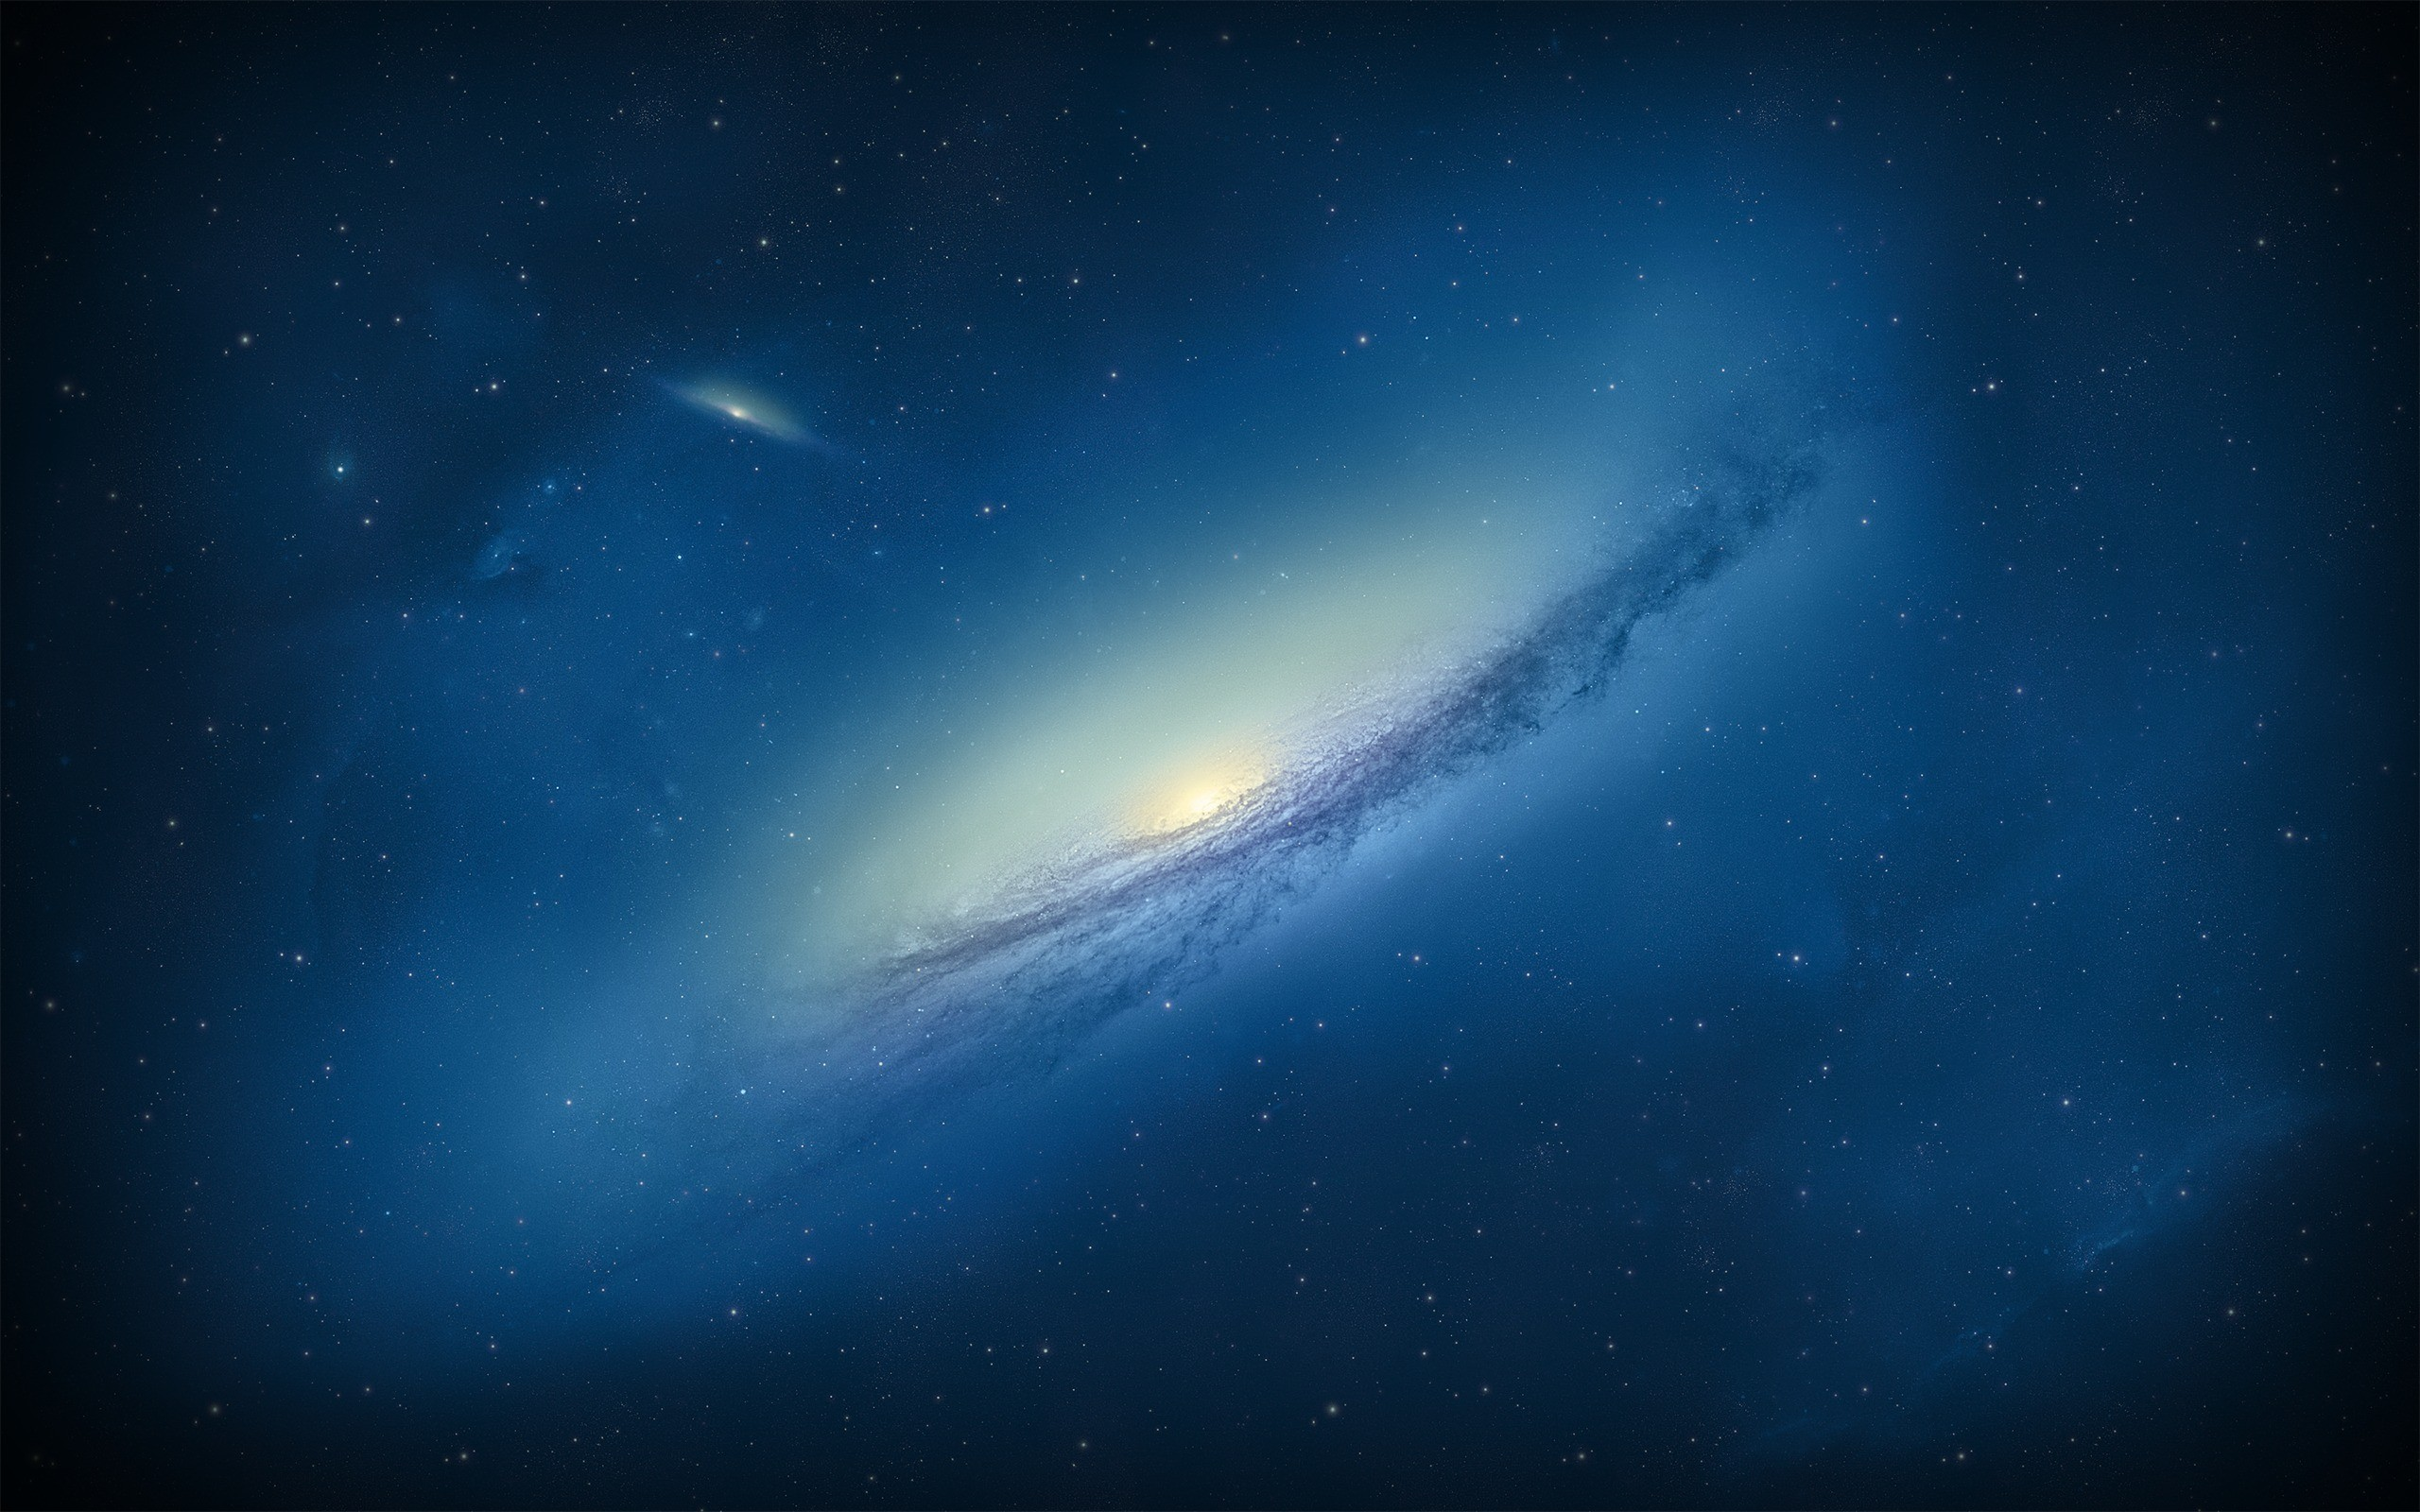 Blue Galaxy Wallpaper Premium Space By Chrisfr06 On